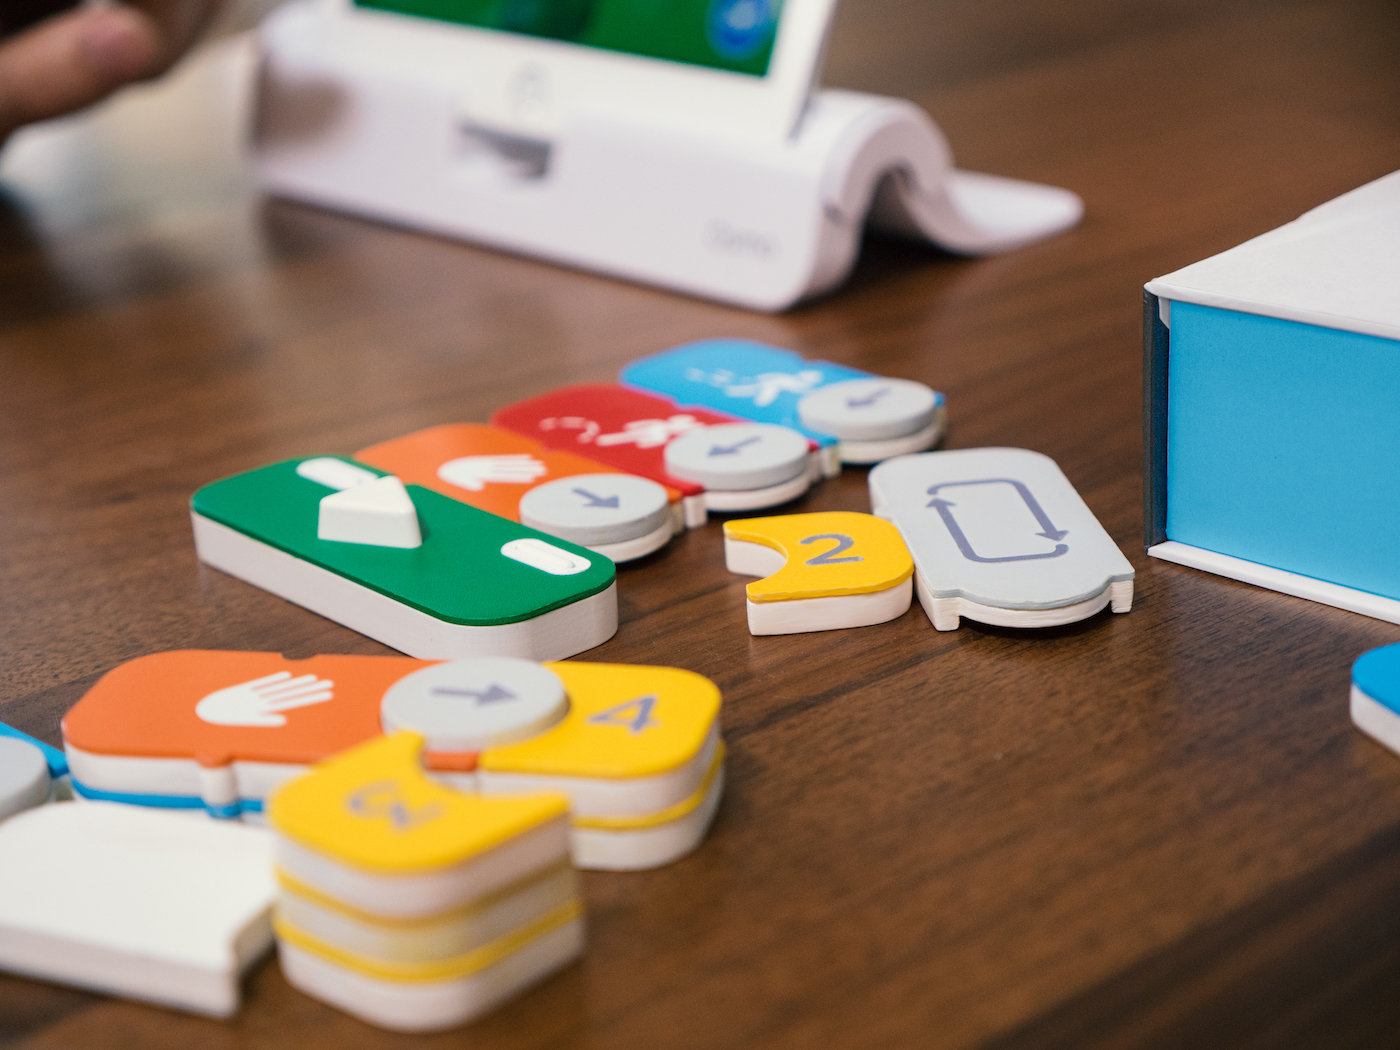 Osmo&#039;s blocks are like Lego for coding